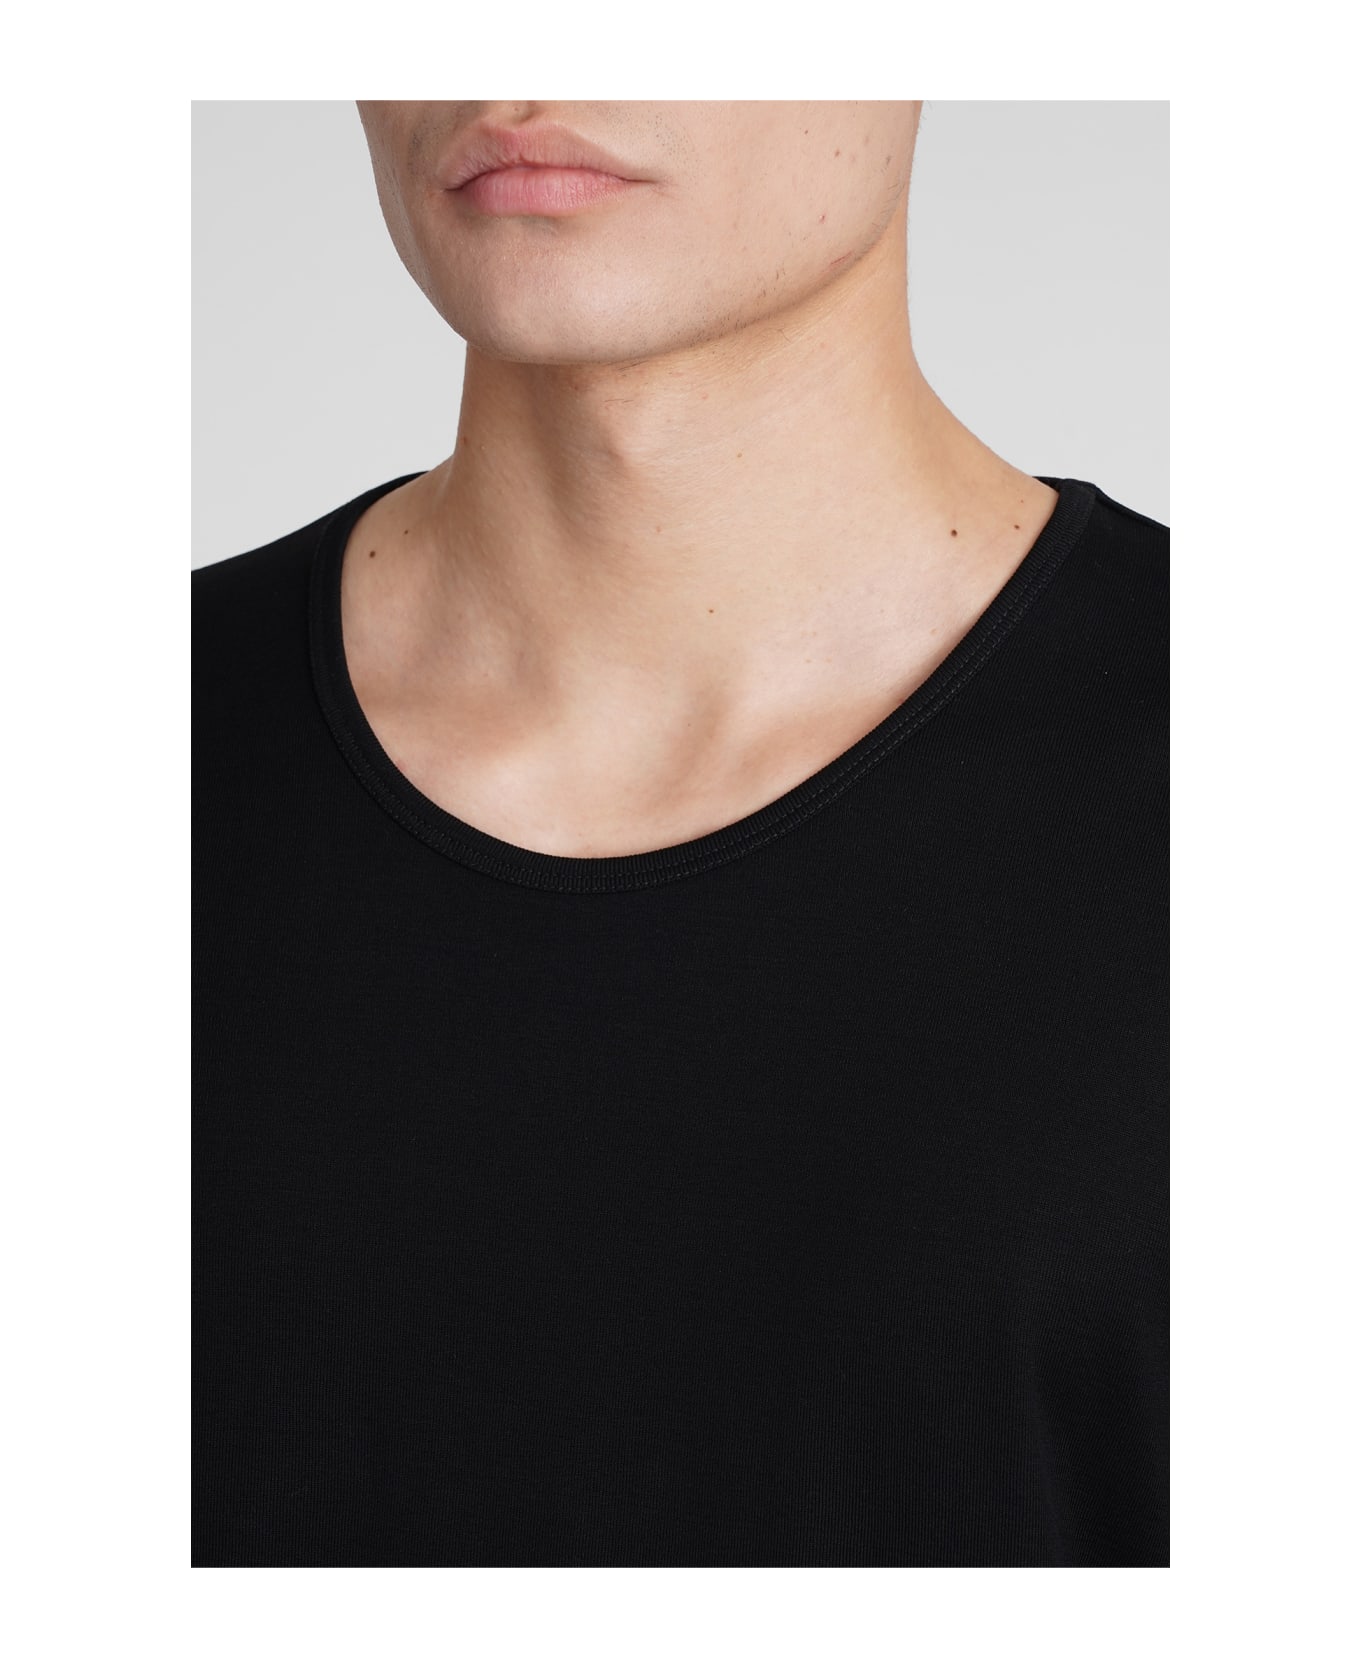 Lemaire Relaxed Fit Crewneck T-shirt - BLACK